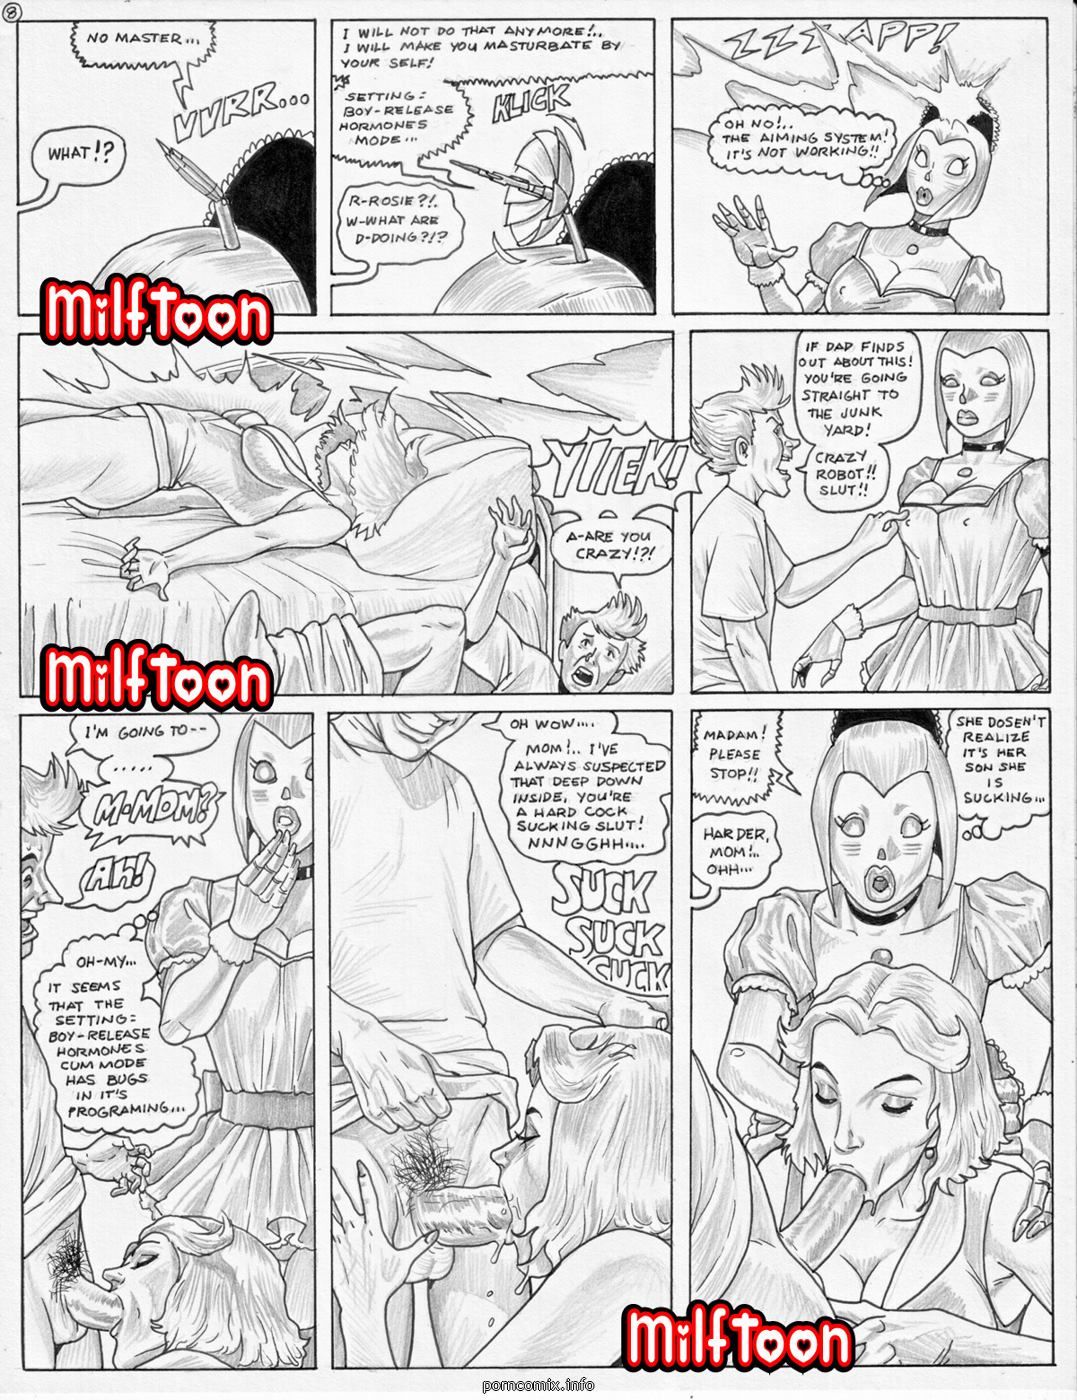 Milftoon - Jepsons page 9